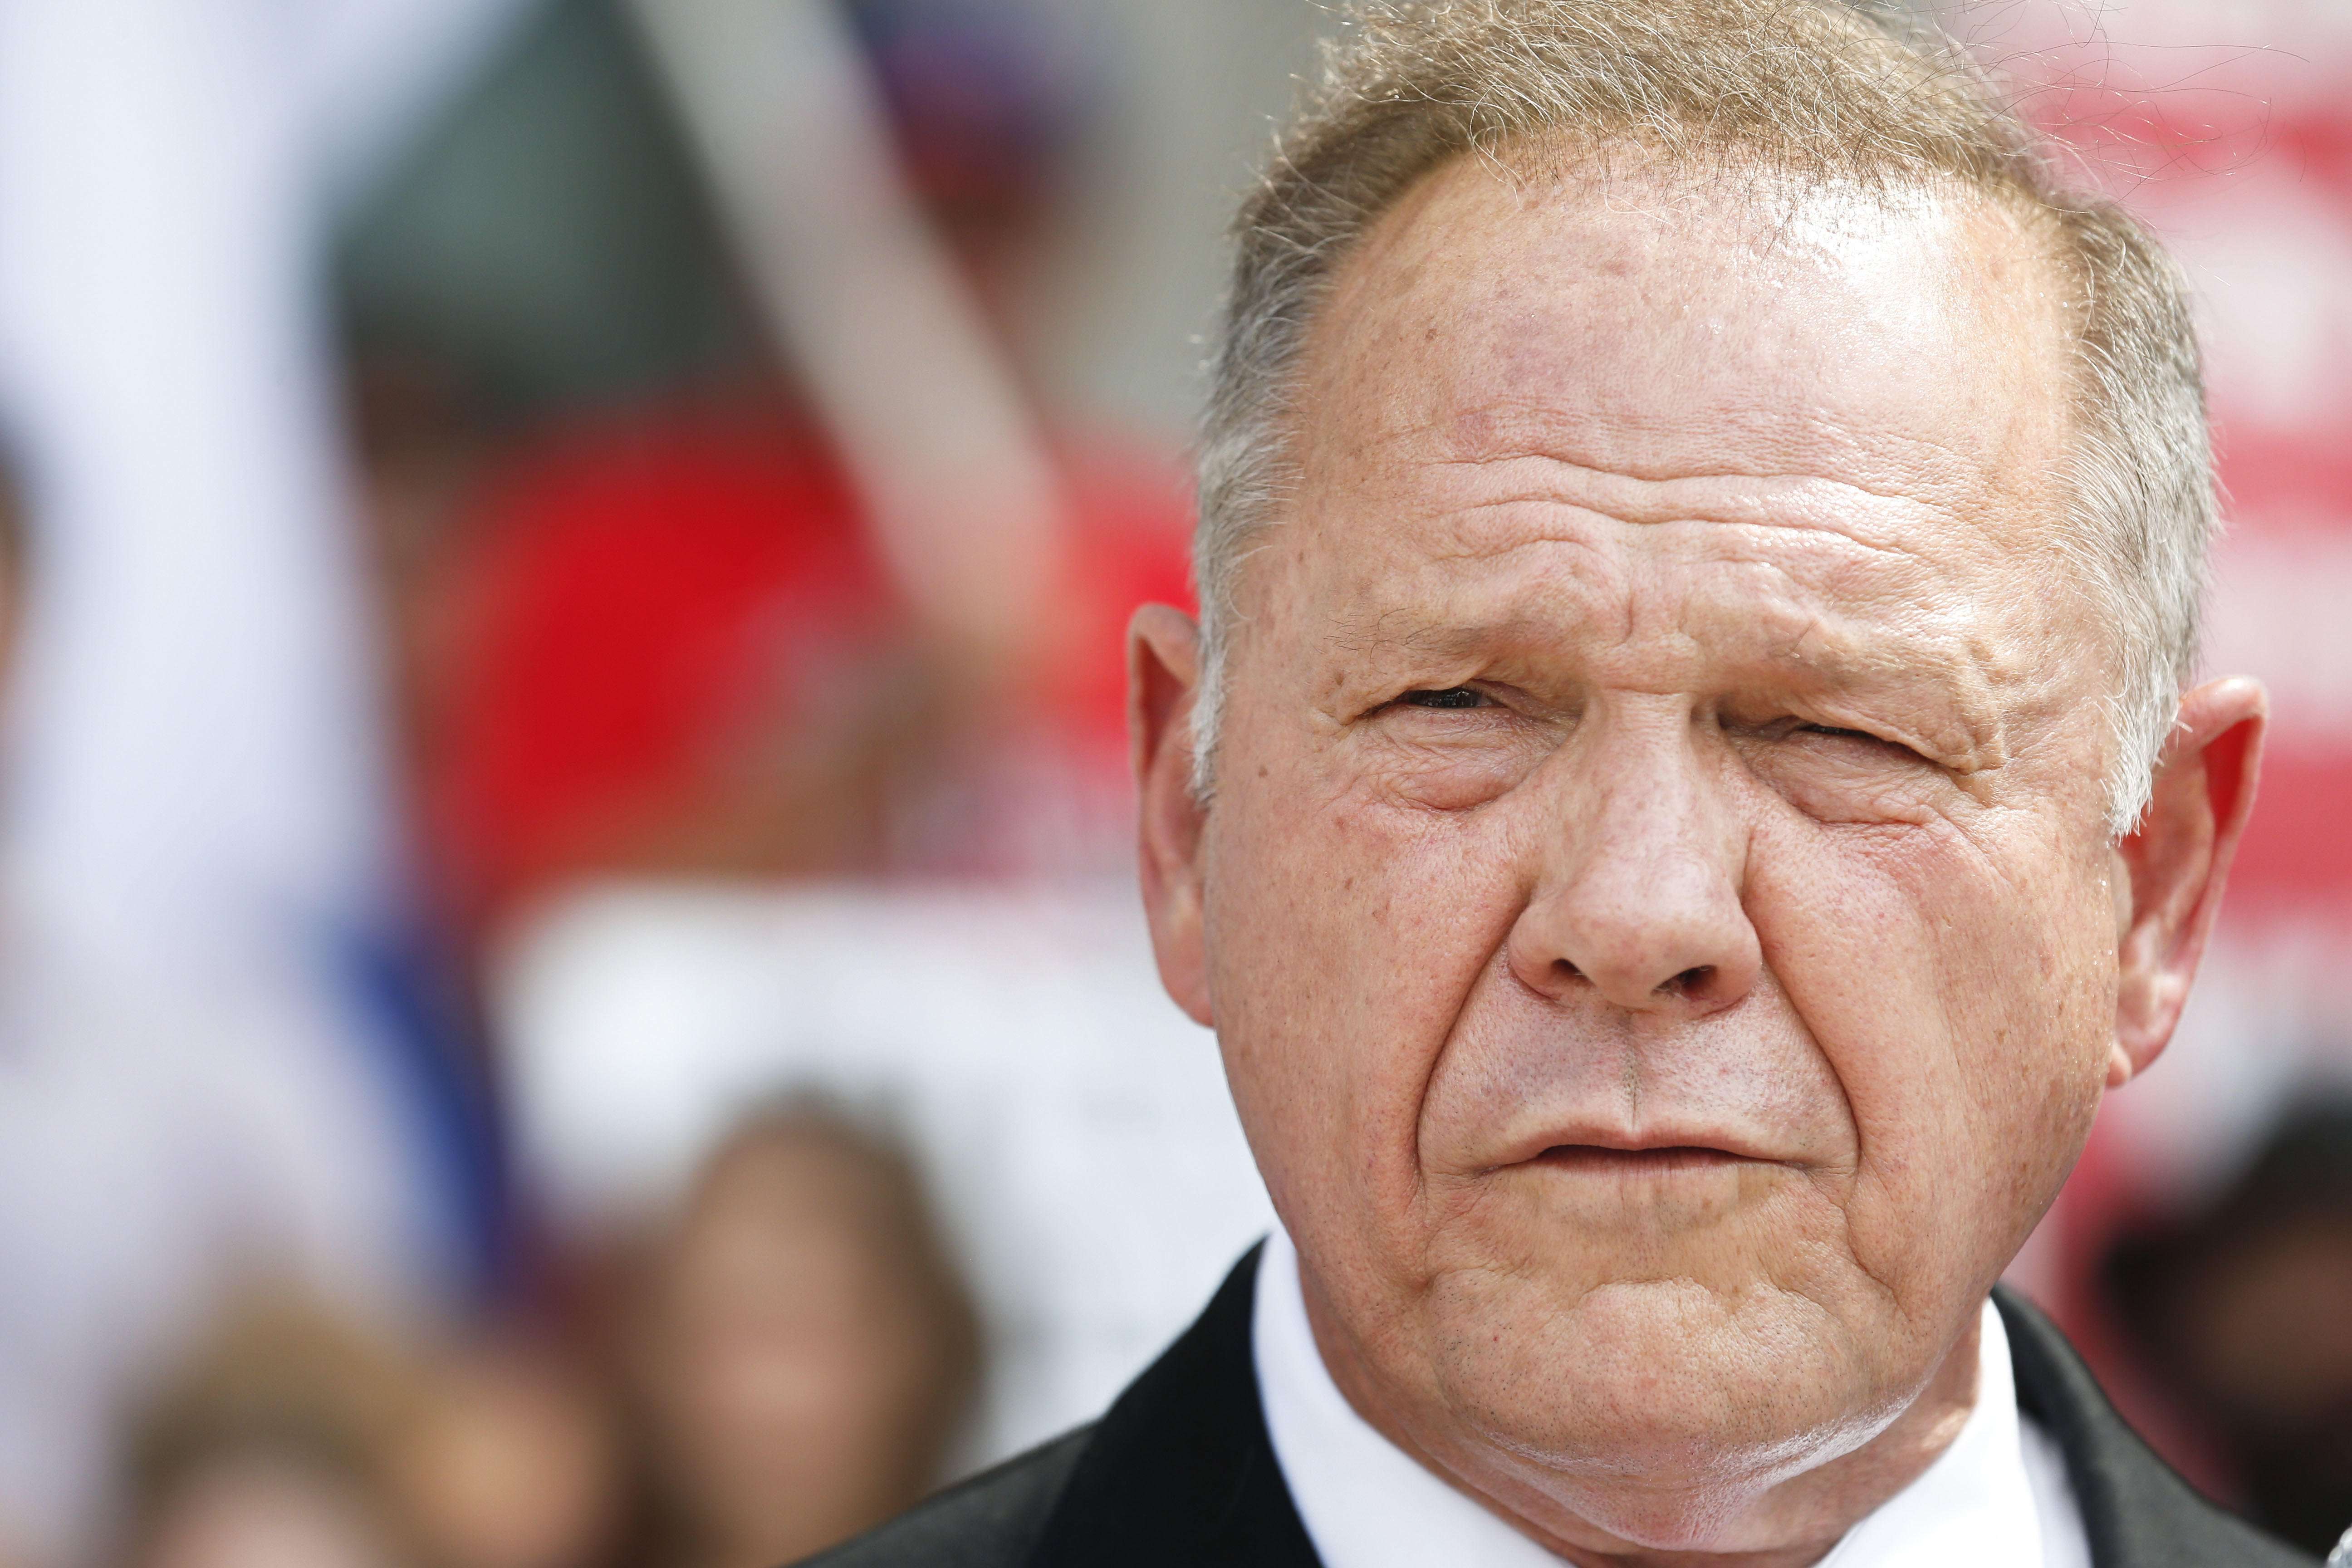 image for Roy Moore's former colleague says it was "common knowledge" he dated teens